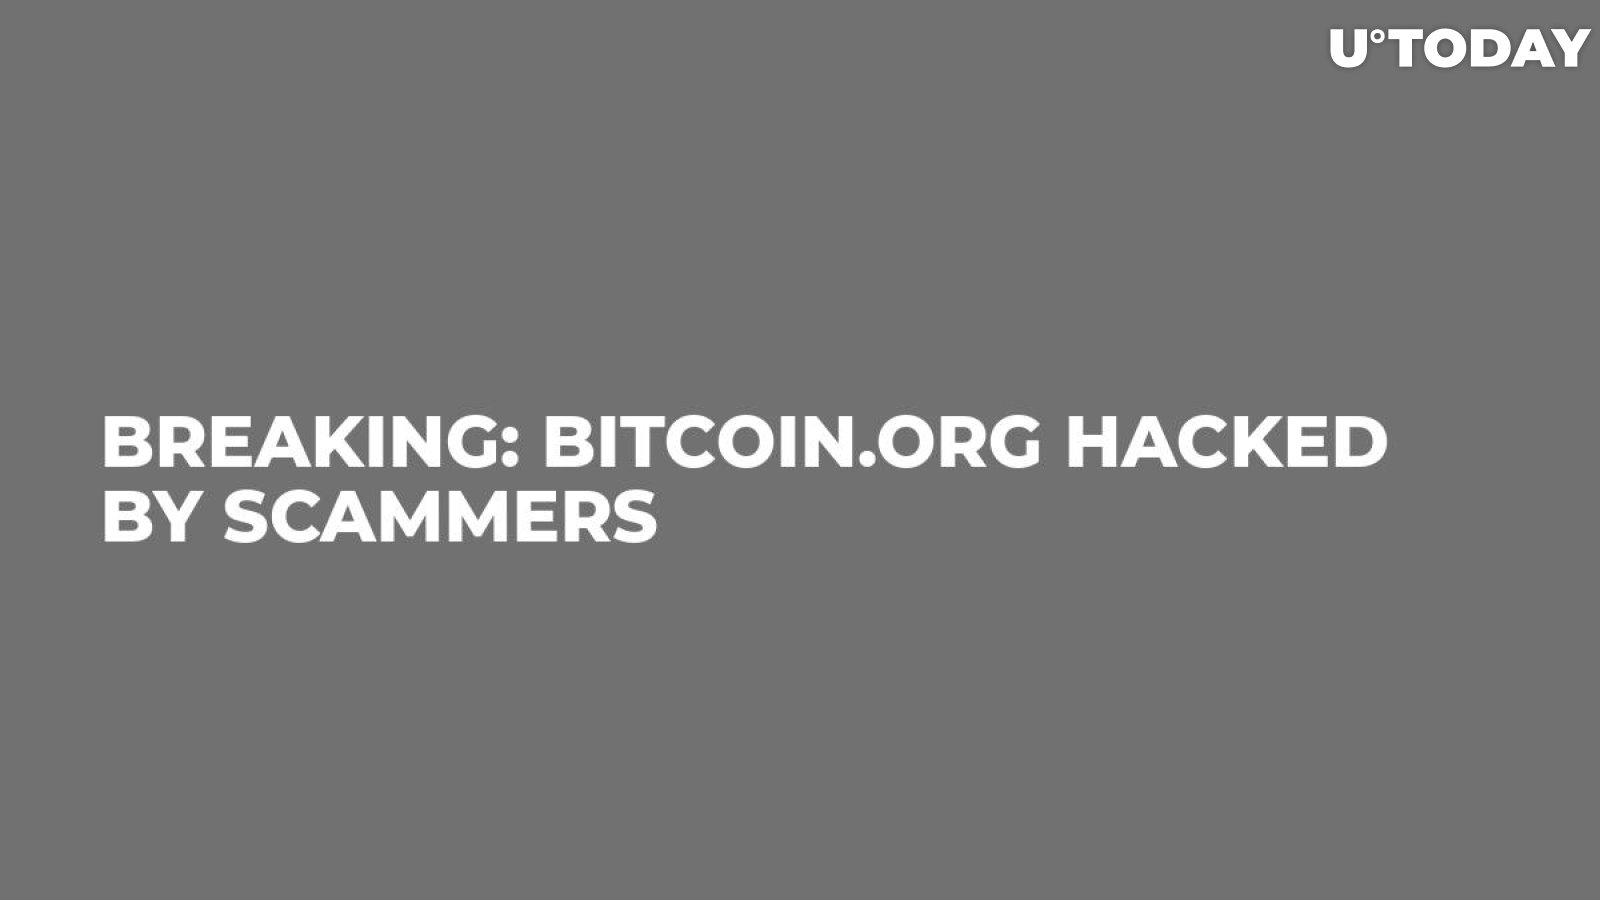 BREAKING: Bitcoin.org Hacked by Scammers